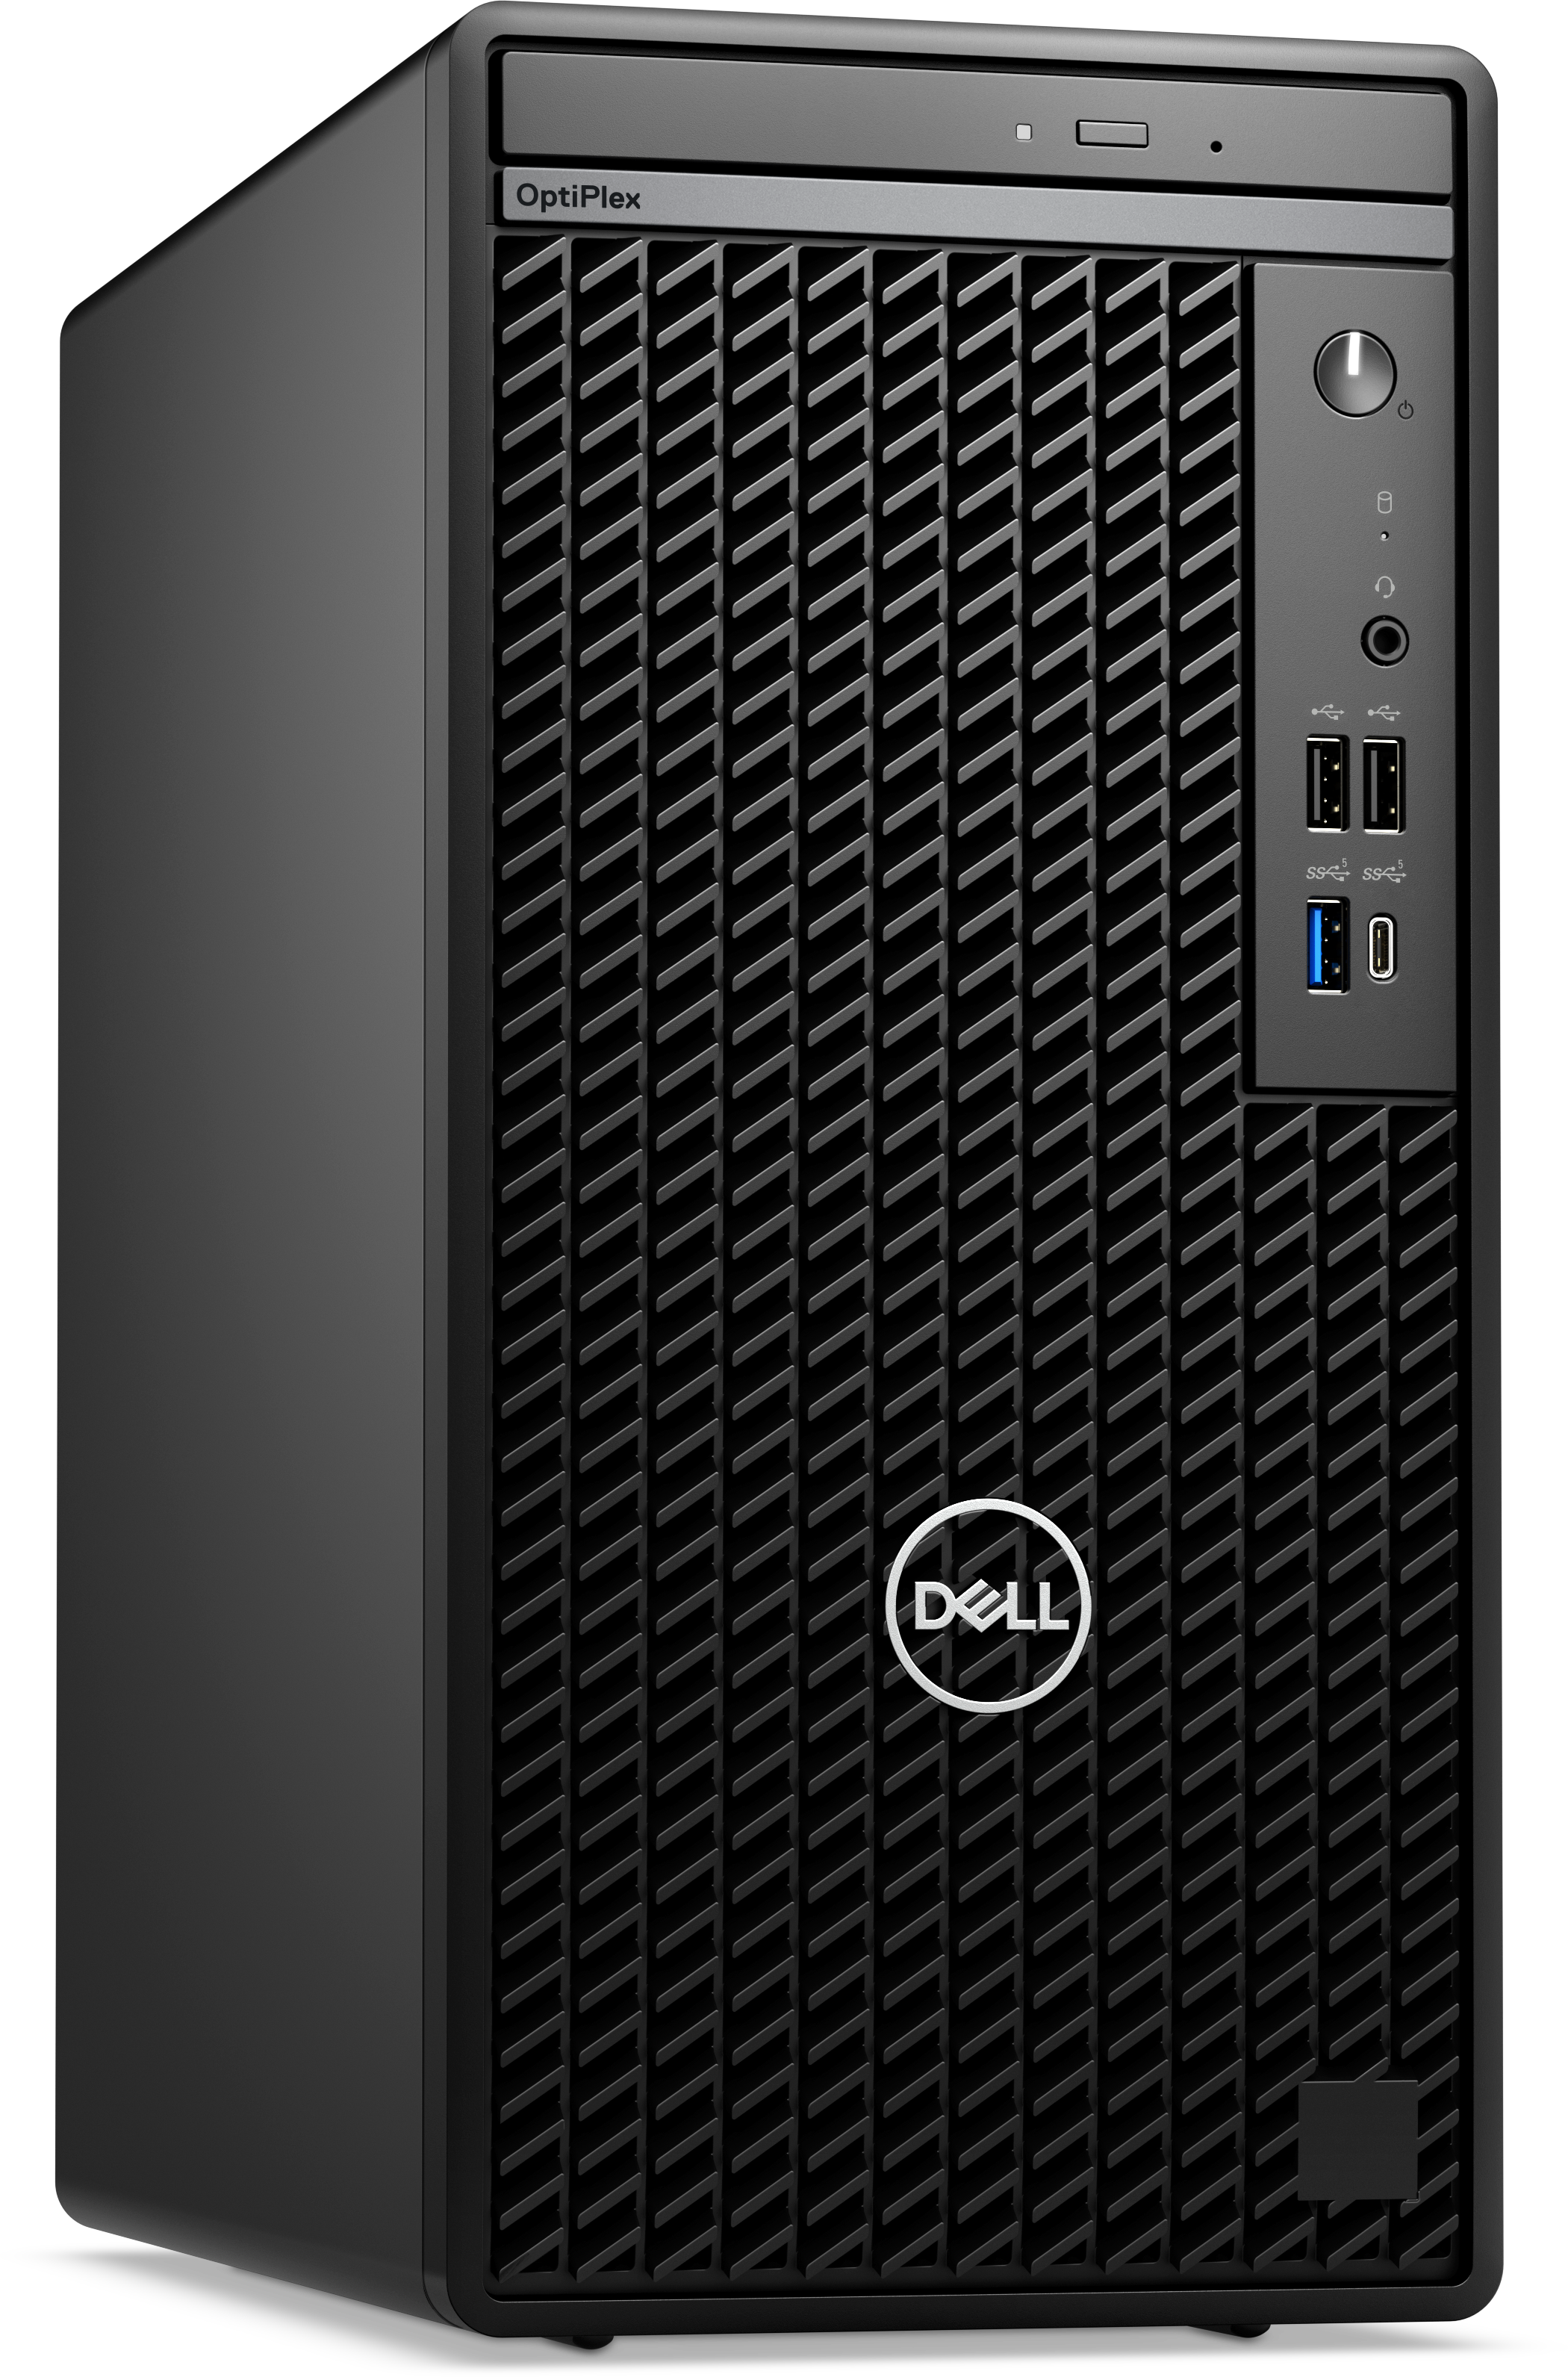 https://i.dell.com/is/image/DellContent/content/dam/images/products/desktops-and-all-in-ones/optiplex/7020-mt/op7020mt-csy-0015rf-bk.psd